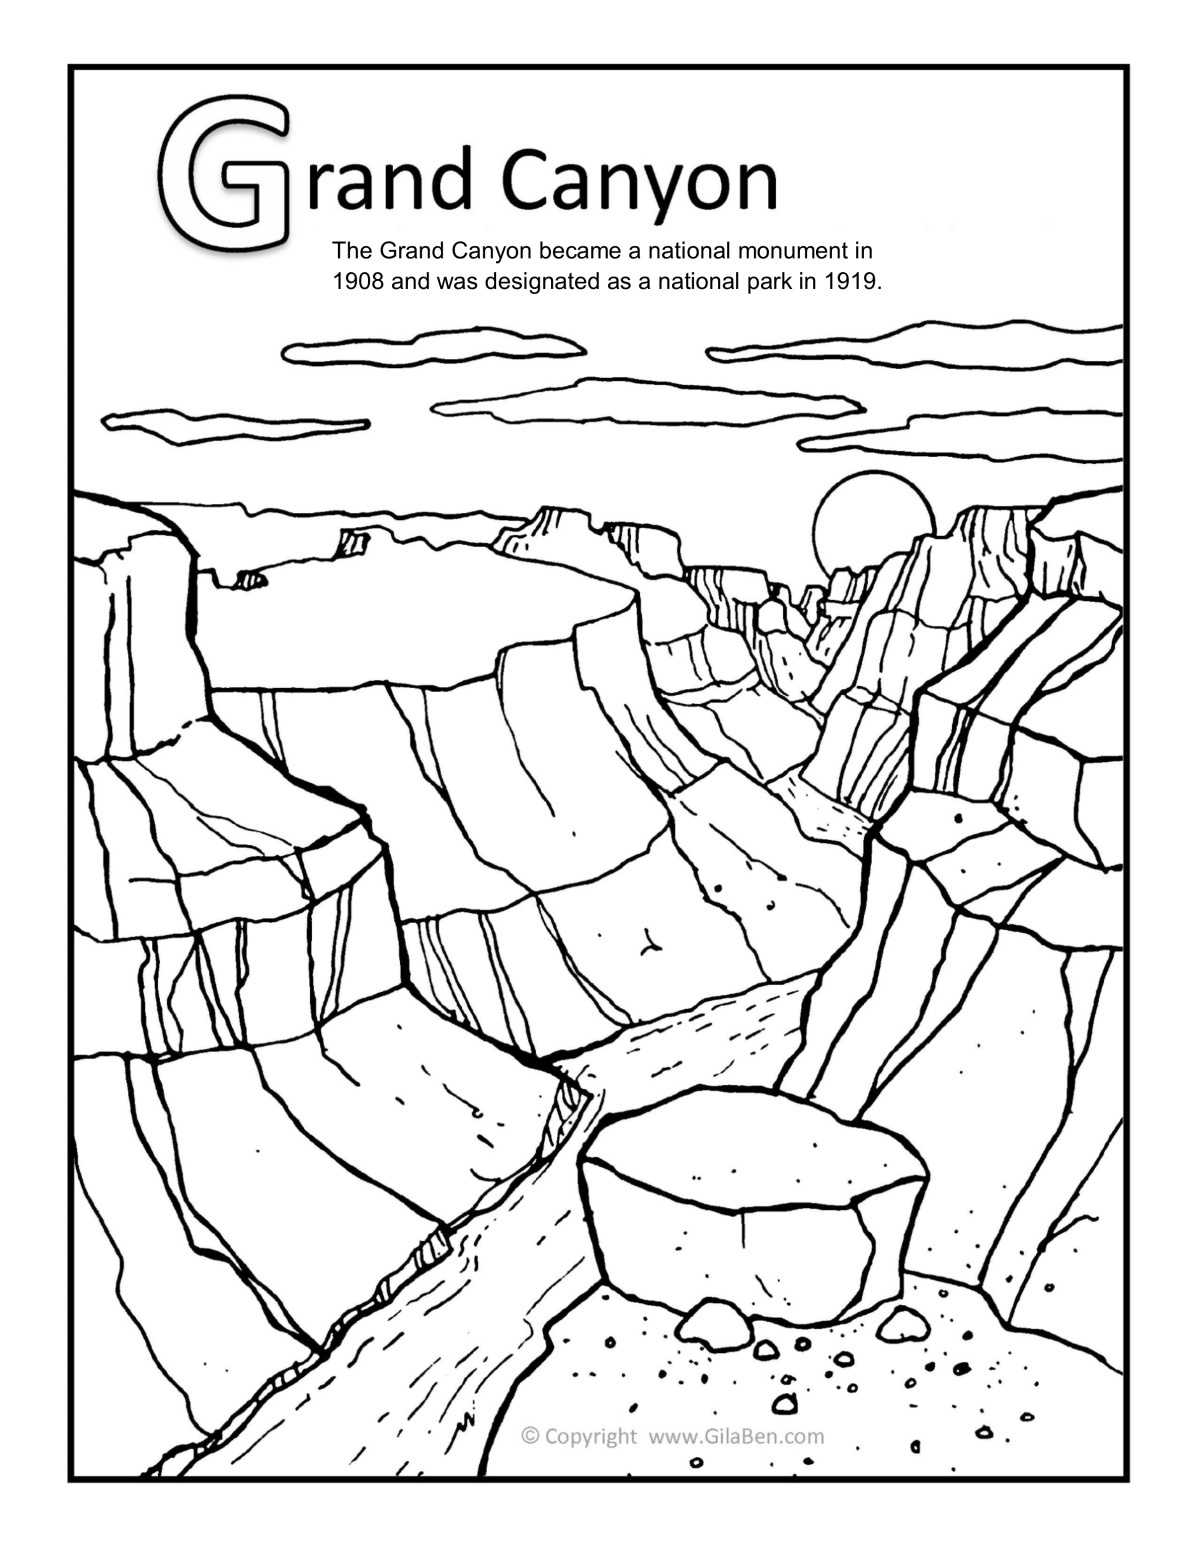 Grand canyon Coloring page